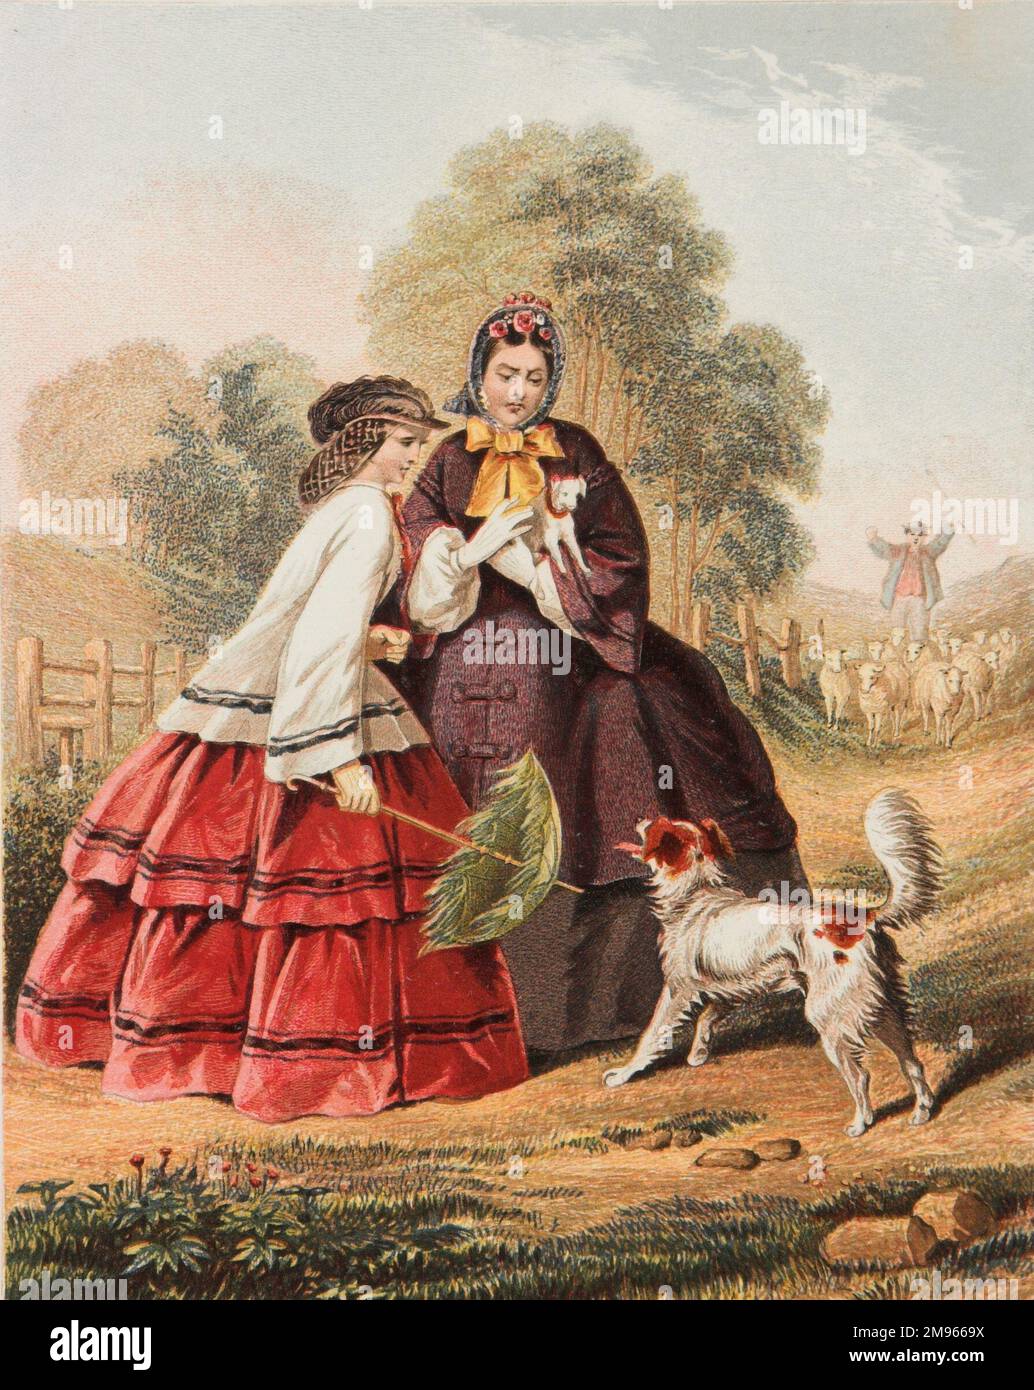 Two ladies out walking in crinolines are barked at by a rather unpleasant sheepdog so one of them decides to attack it with her parasol. Stock Photo